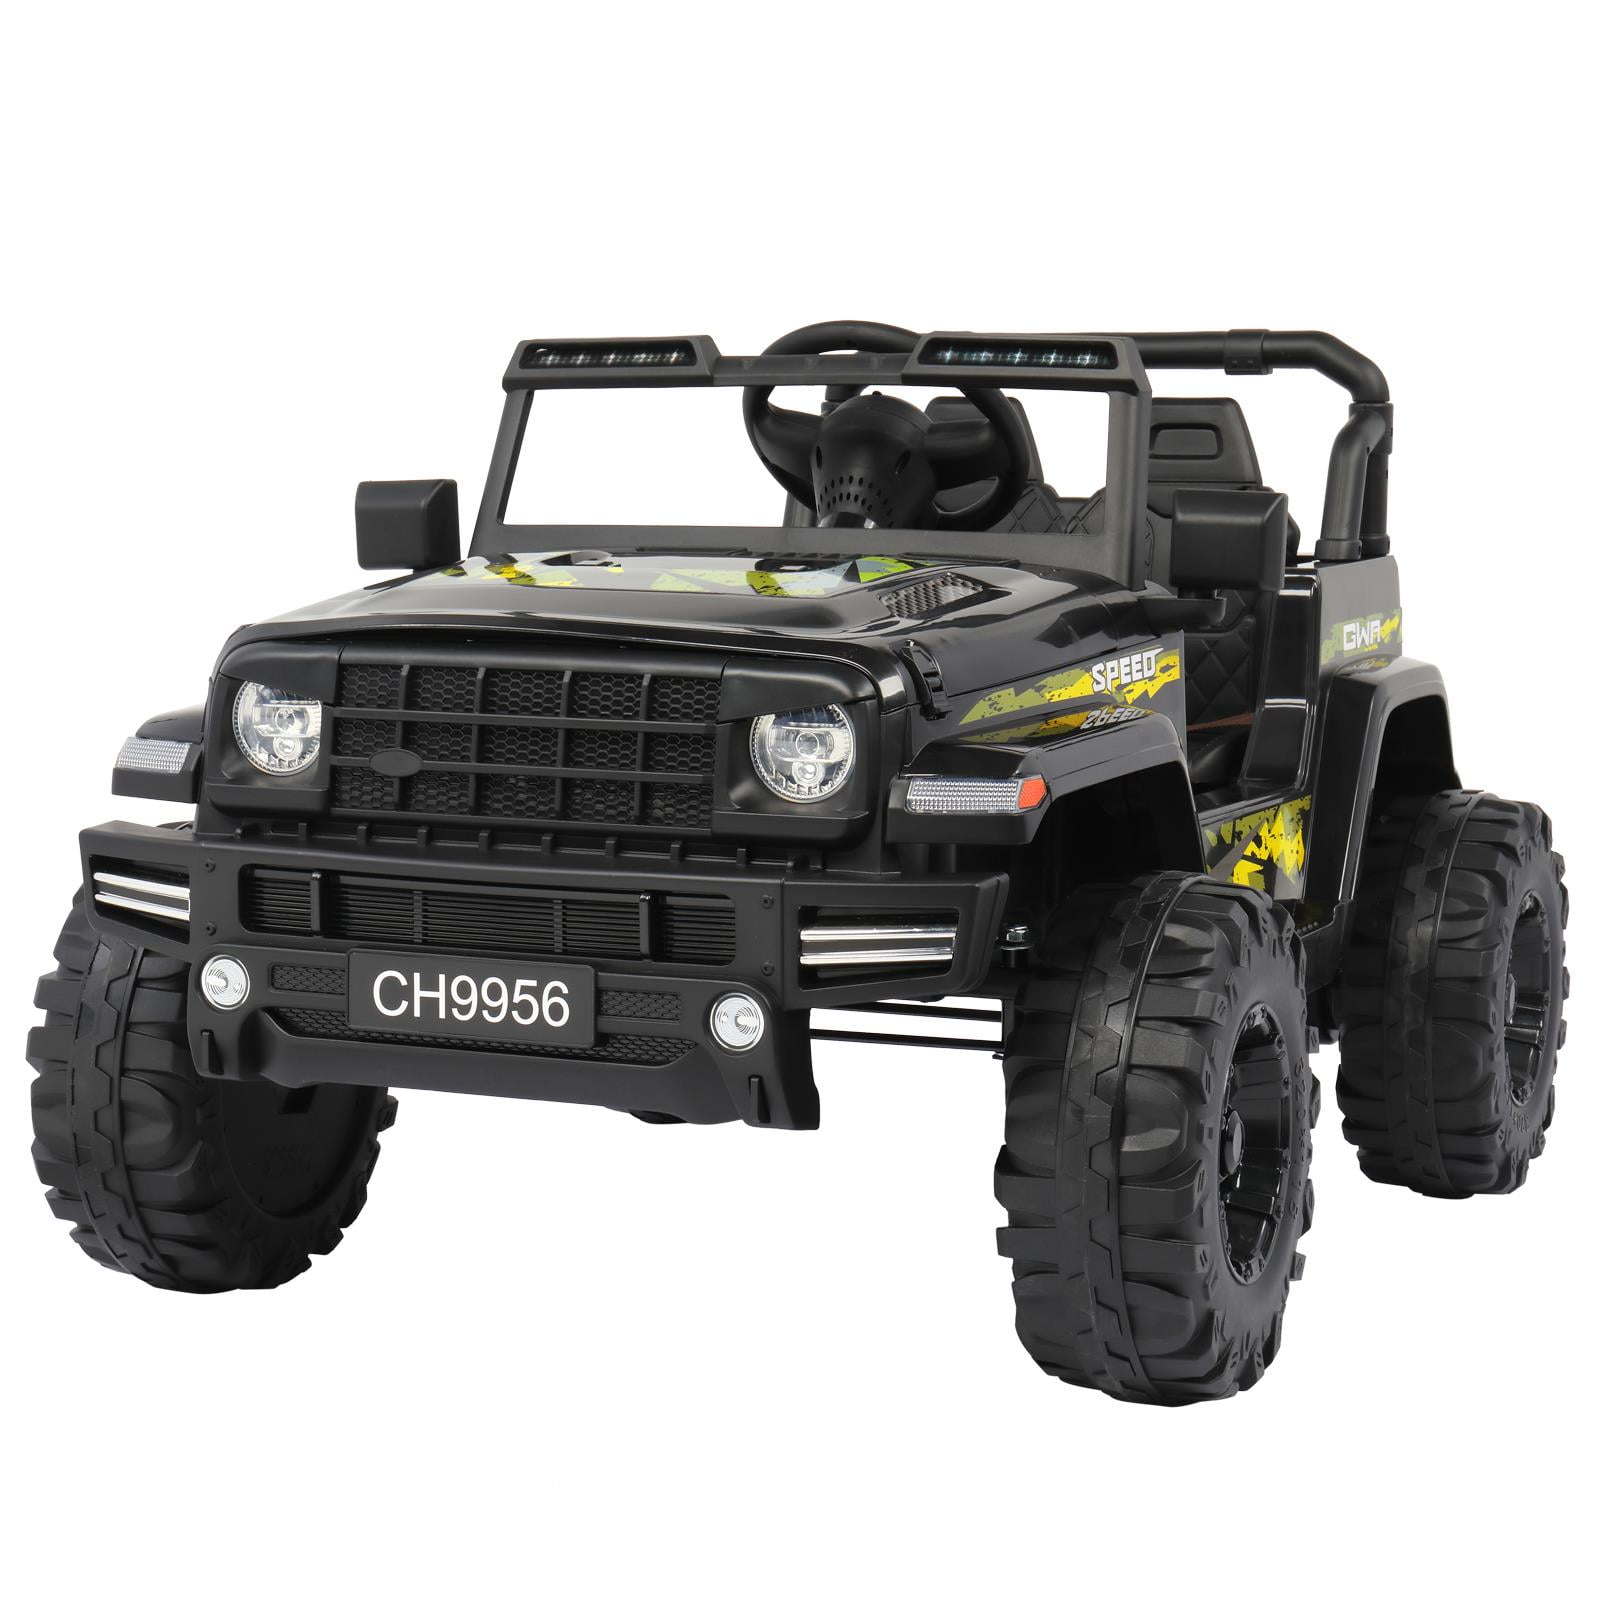 LED Light Black HOMFY Kids Ride on Truck Toy 12V Electric Vehicles Motorized Toddler Realistic Off-Road UTV Car with 2.4G Parental Remote Control Two Boxes MP3/Bluetooth Player 